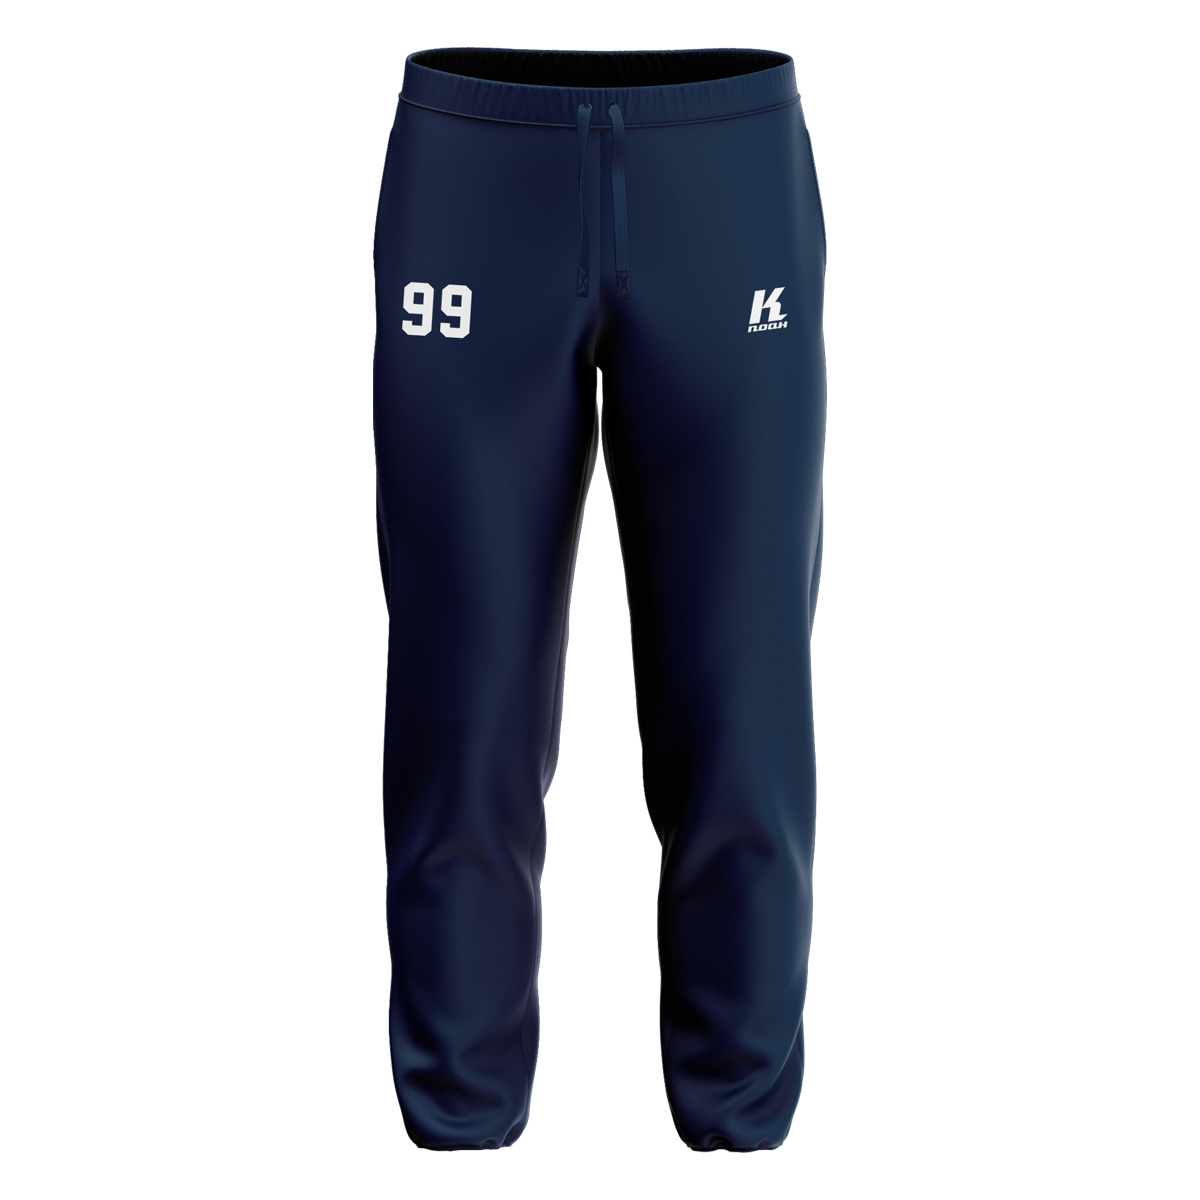 Rams Basic Sweatpant with Cuffs Navy ST793 with Playernumber/Initials